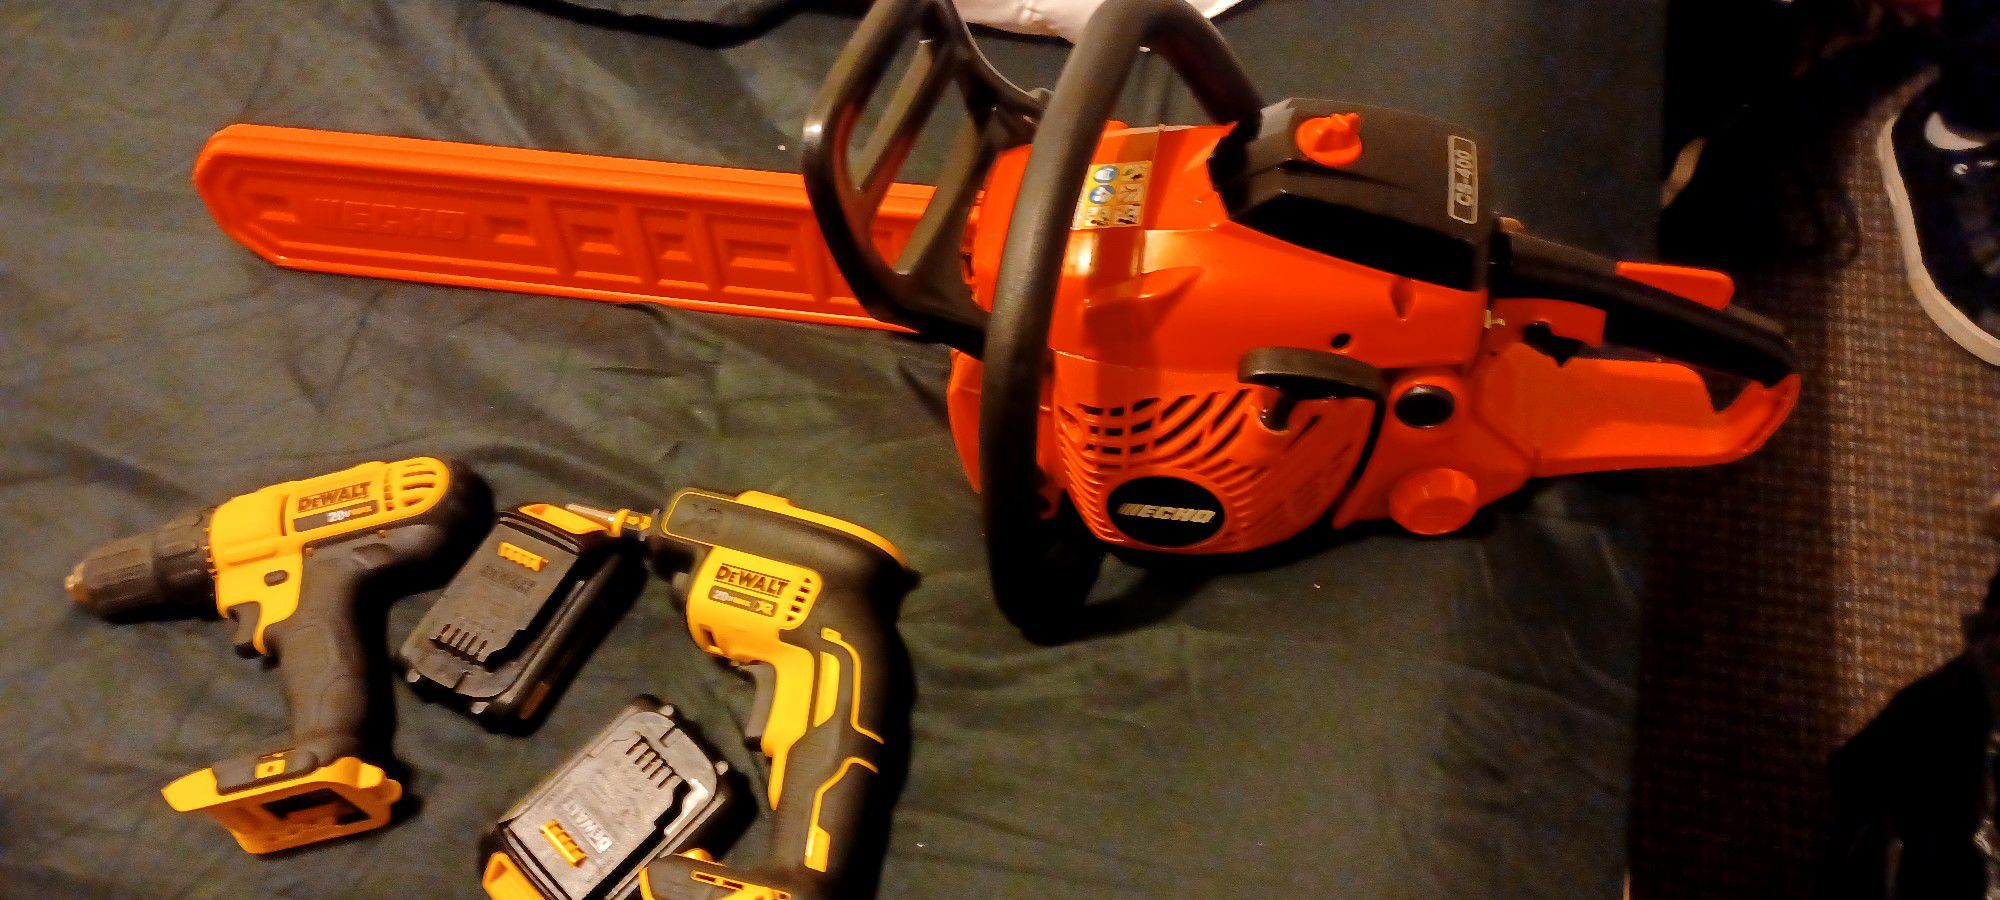 Cs 400 Ecko Chainsaw Dewalt Impact Drill Set 2 Battery's And Charger